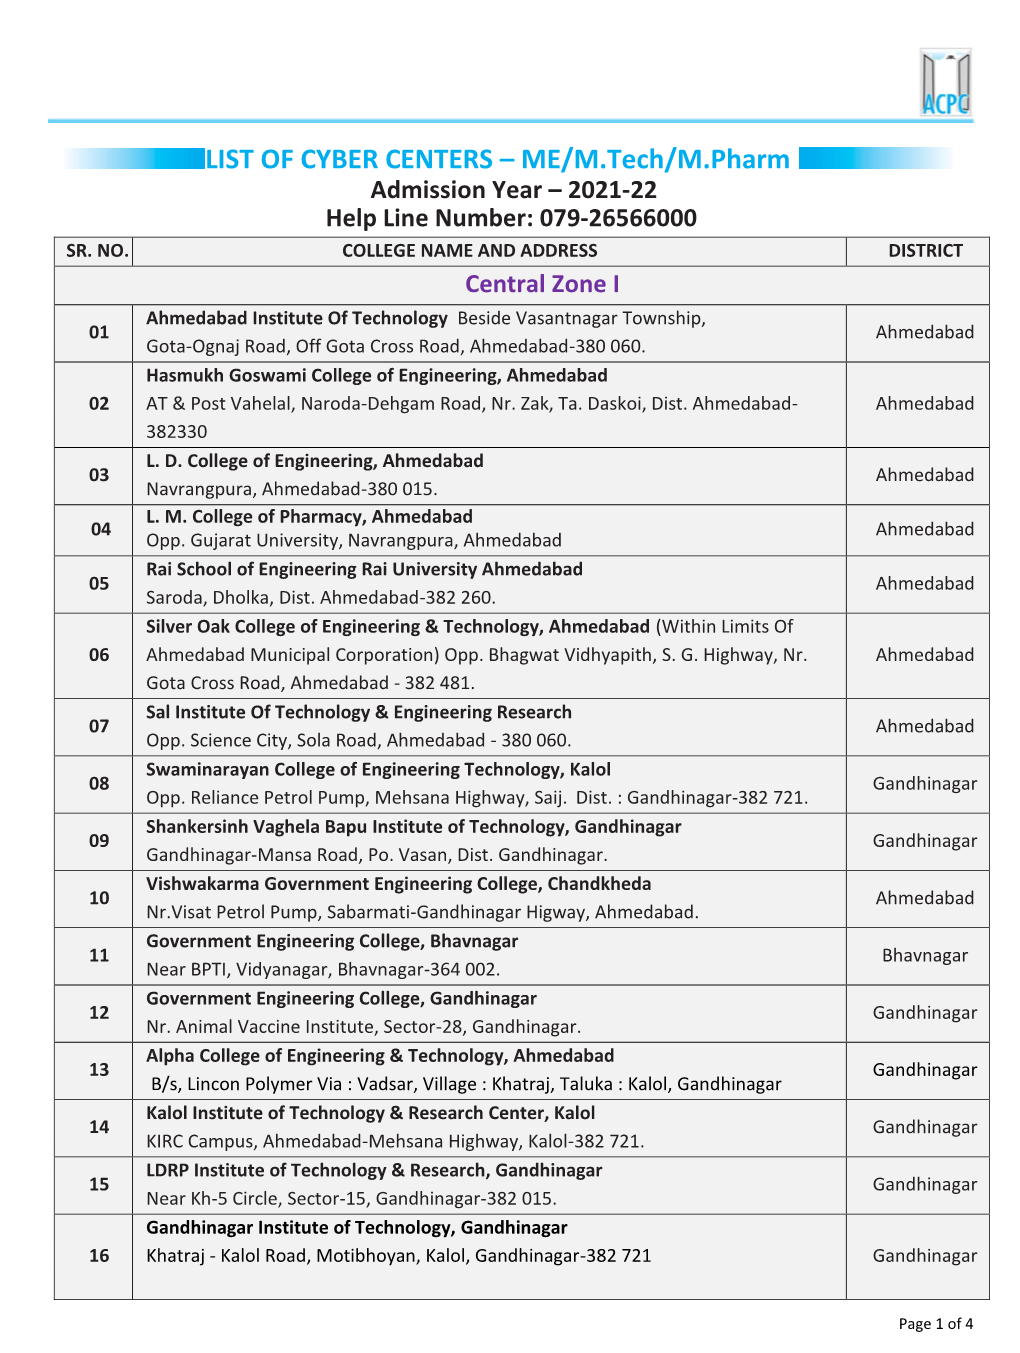 LIST of CYBER CENTERS – ME/M.Tech/M.Pharm Admission Year – 2021-22